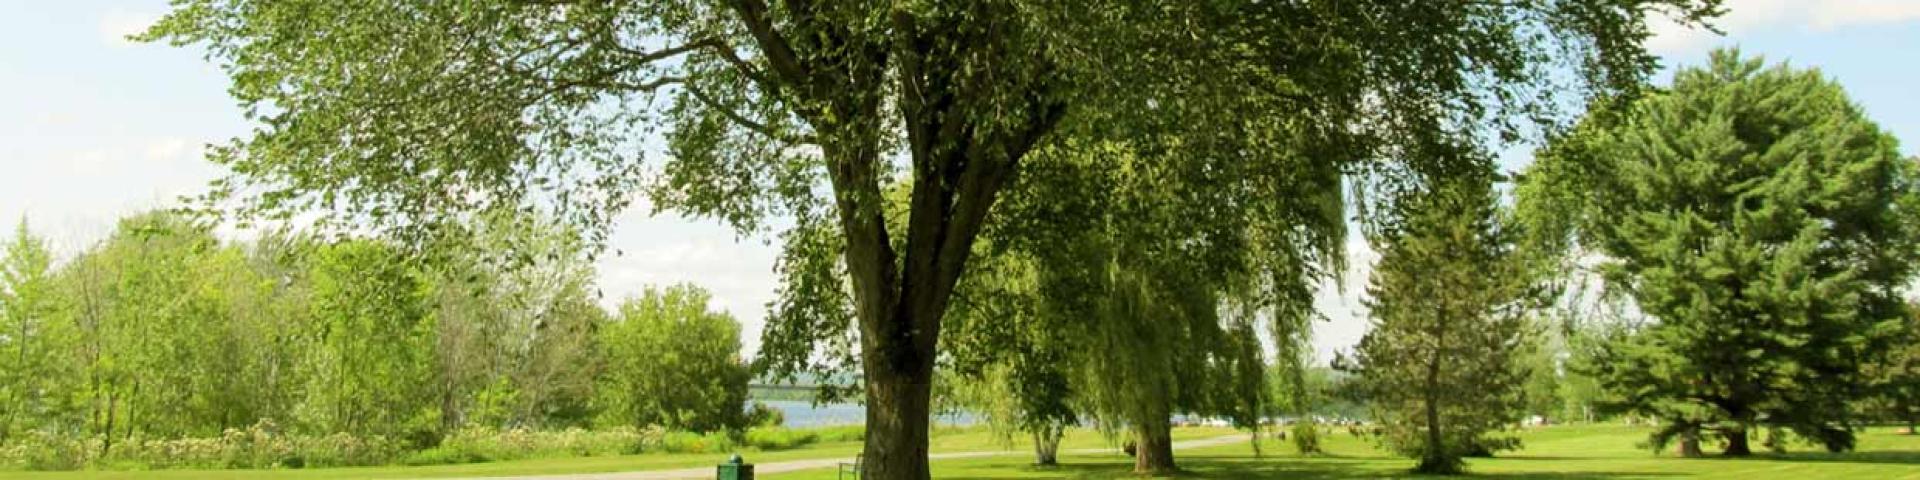 park with trees in the summer